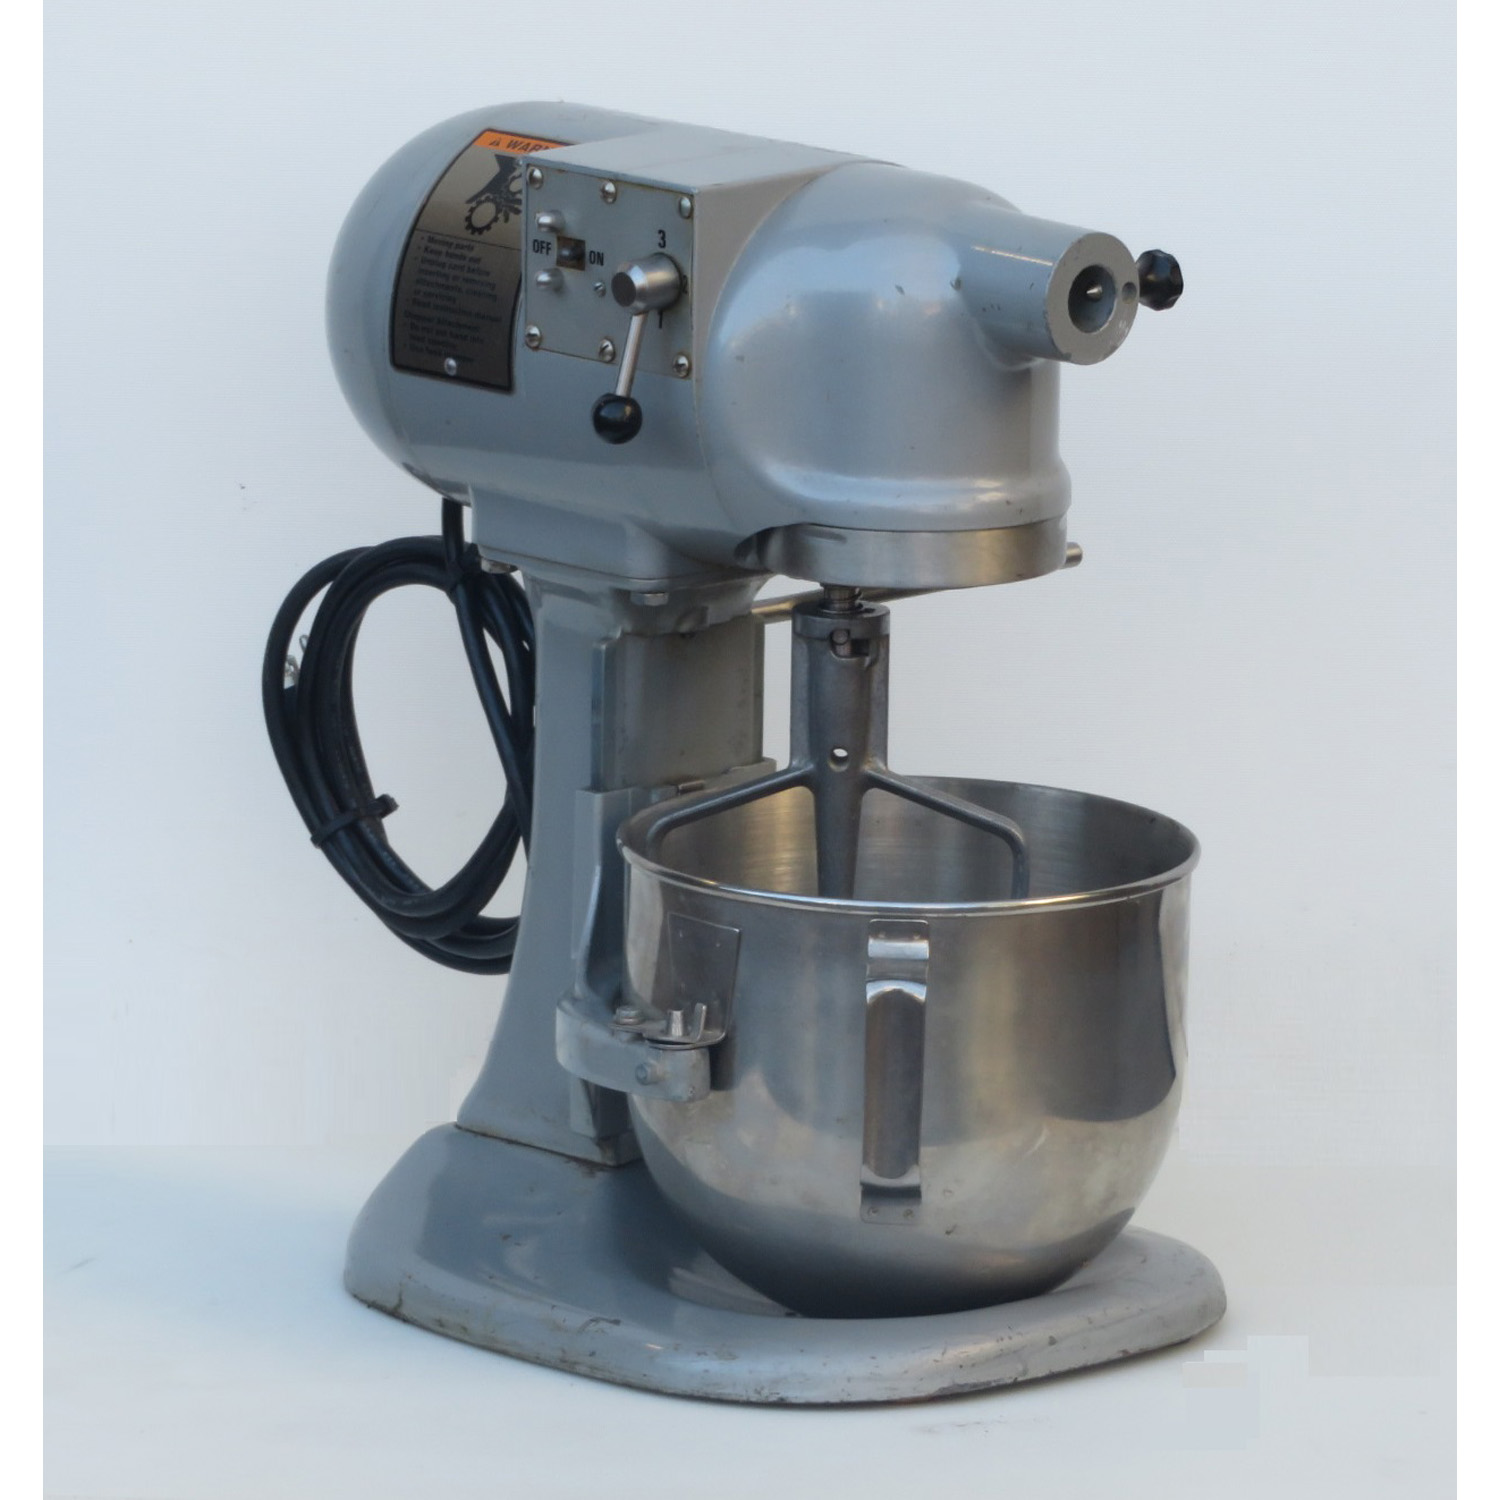 Hobart 5 Quart N50 Mixer, Used Great Condition